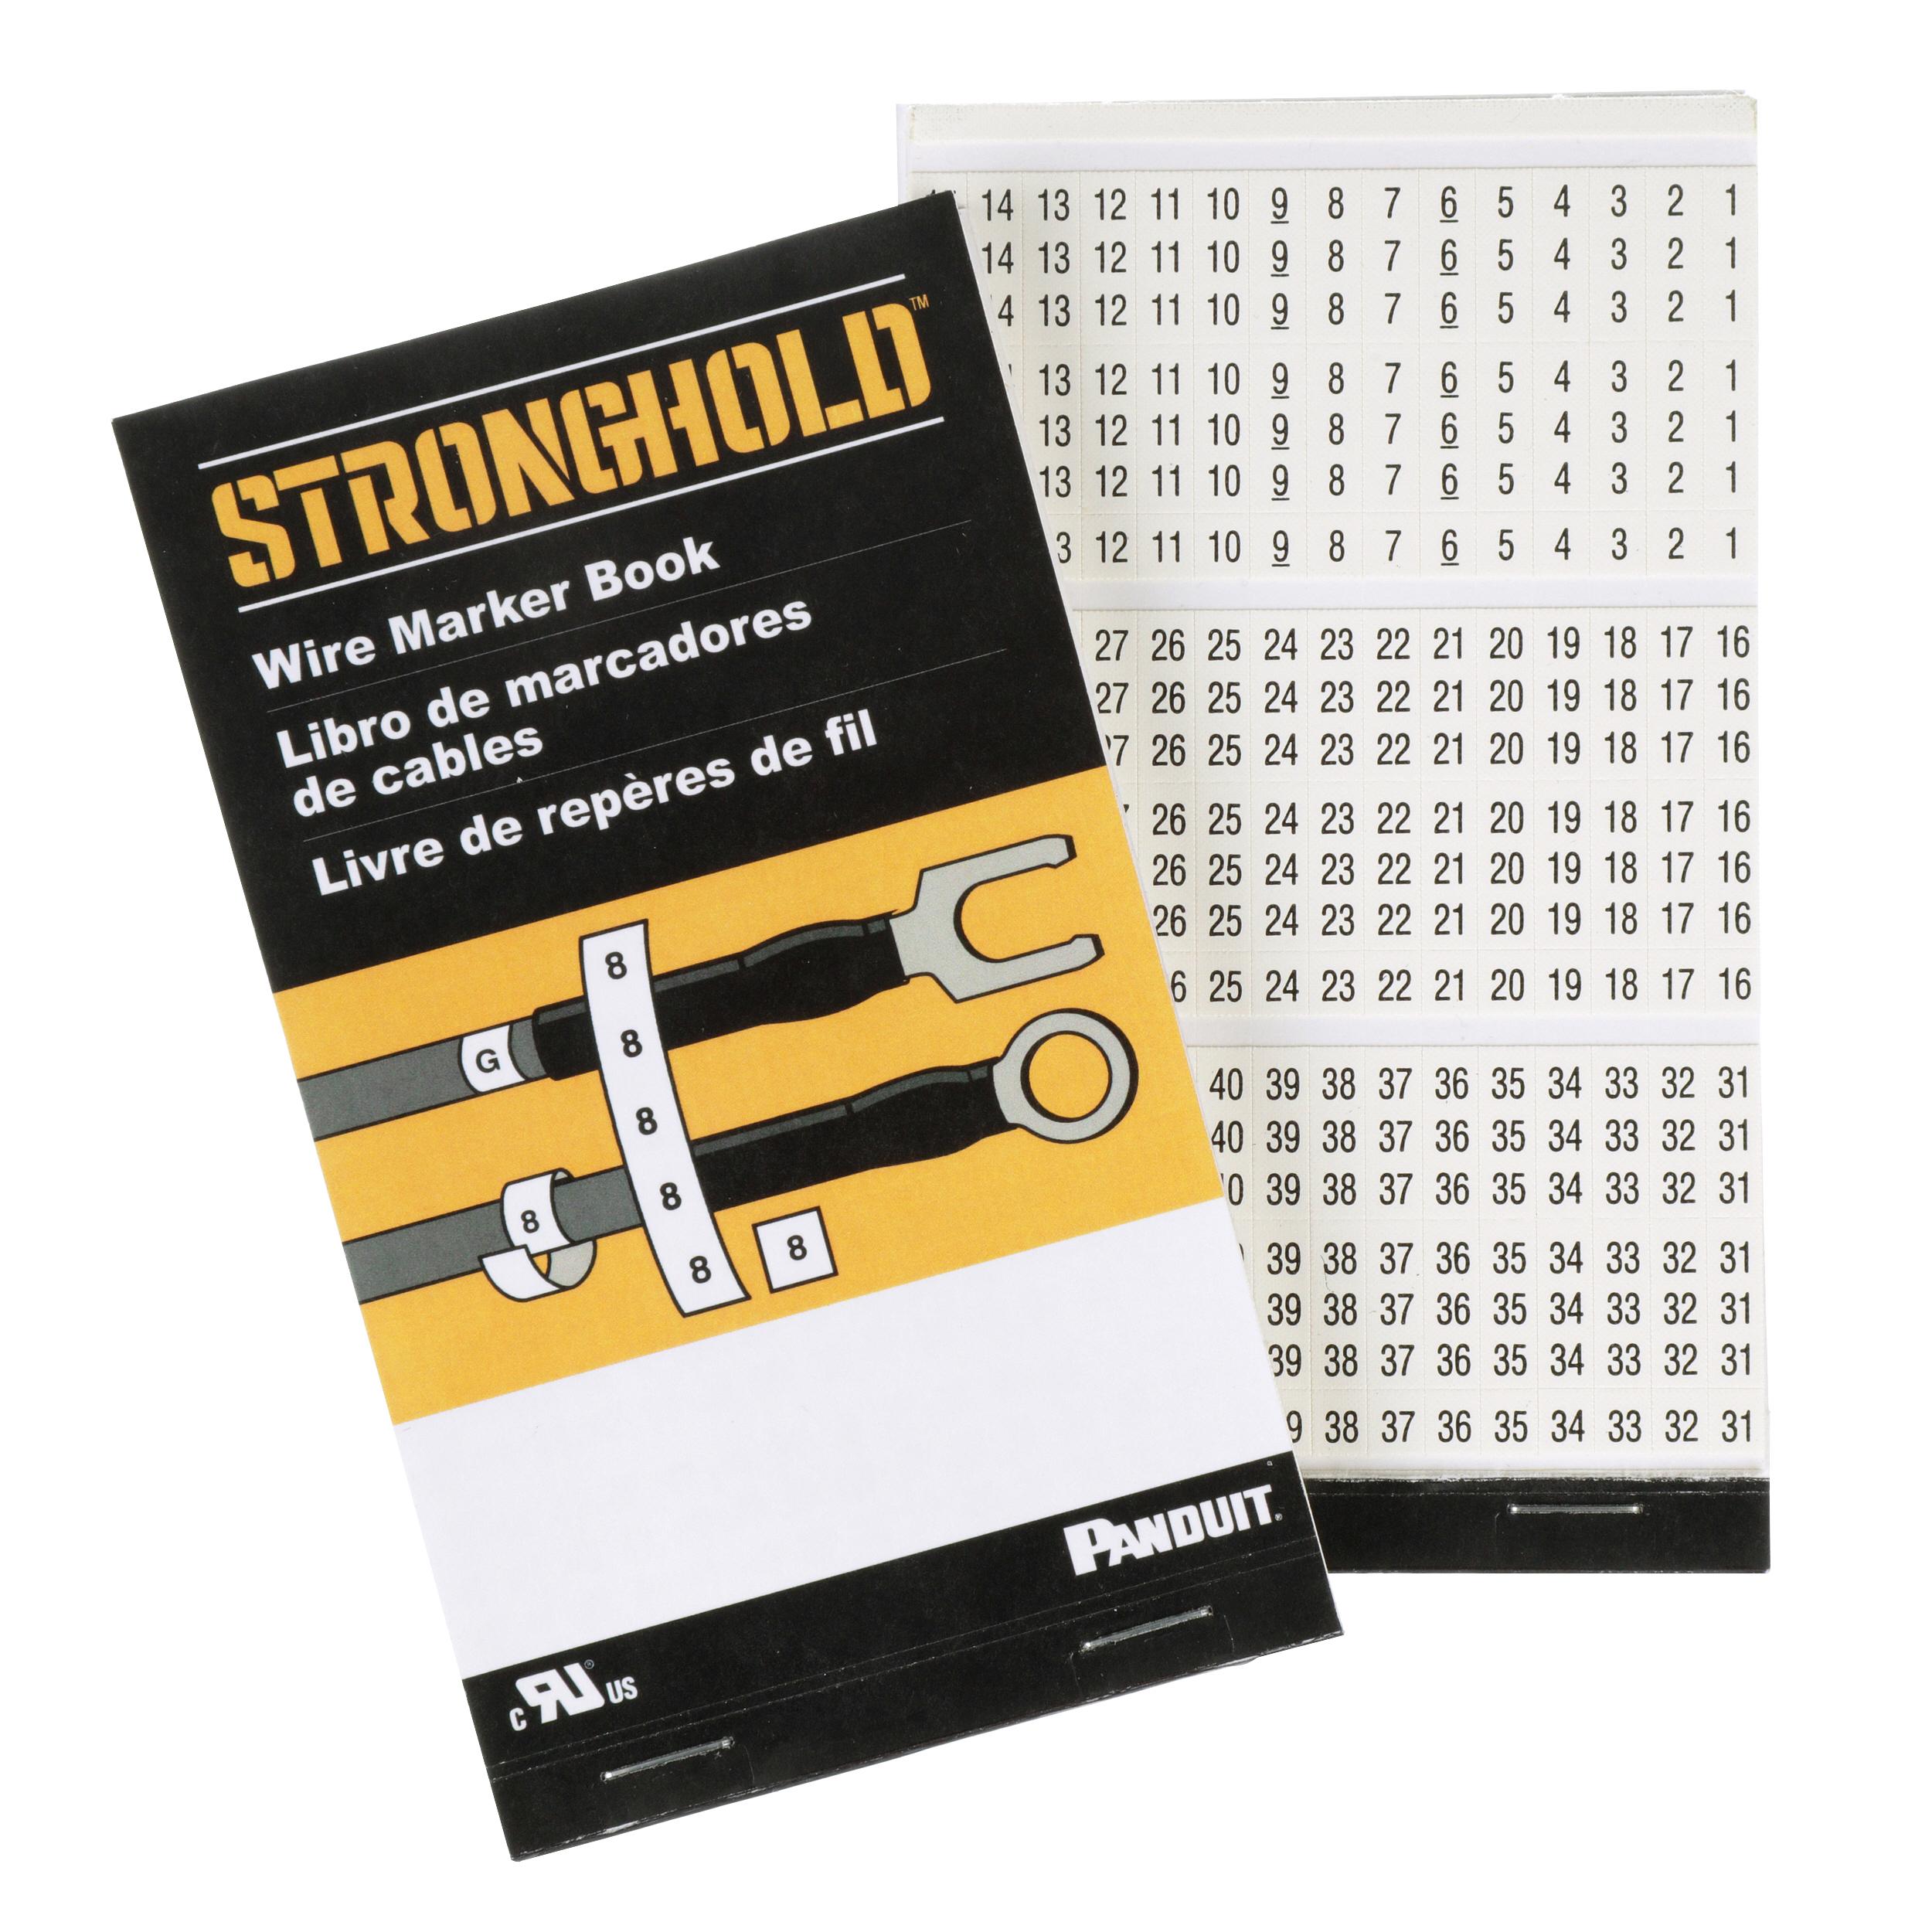 Panduit PCMB-8 StrongHold PCMB-8 Pre-Printed Wire Marker Books